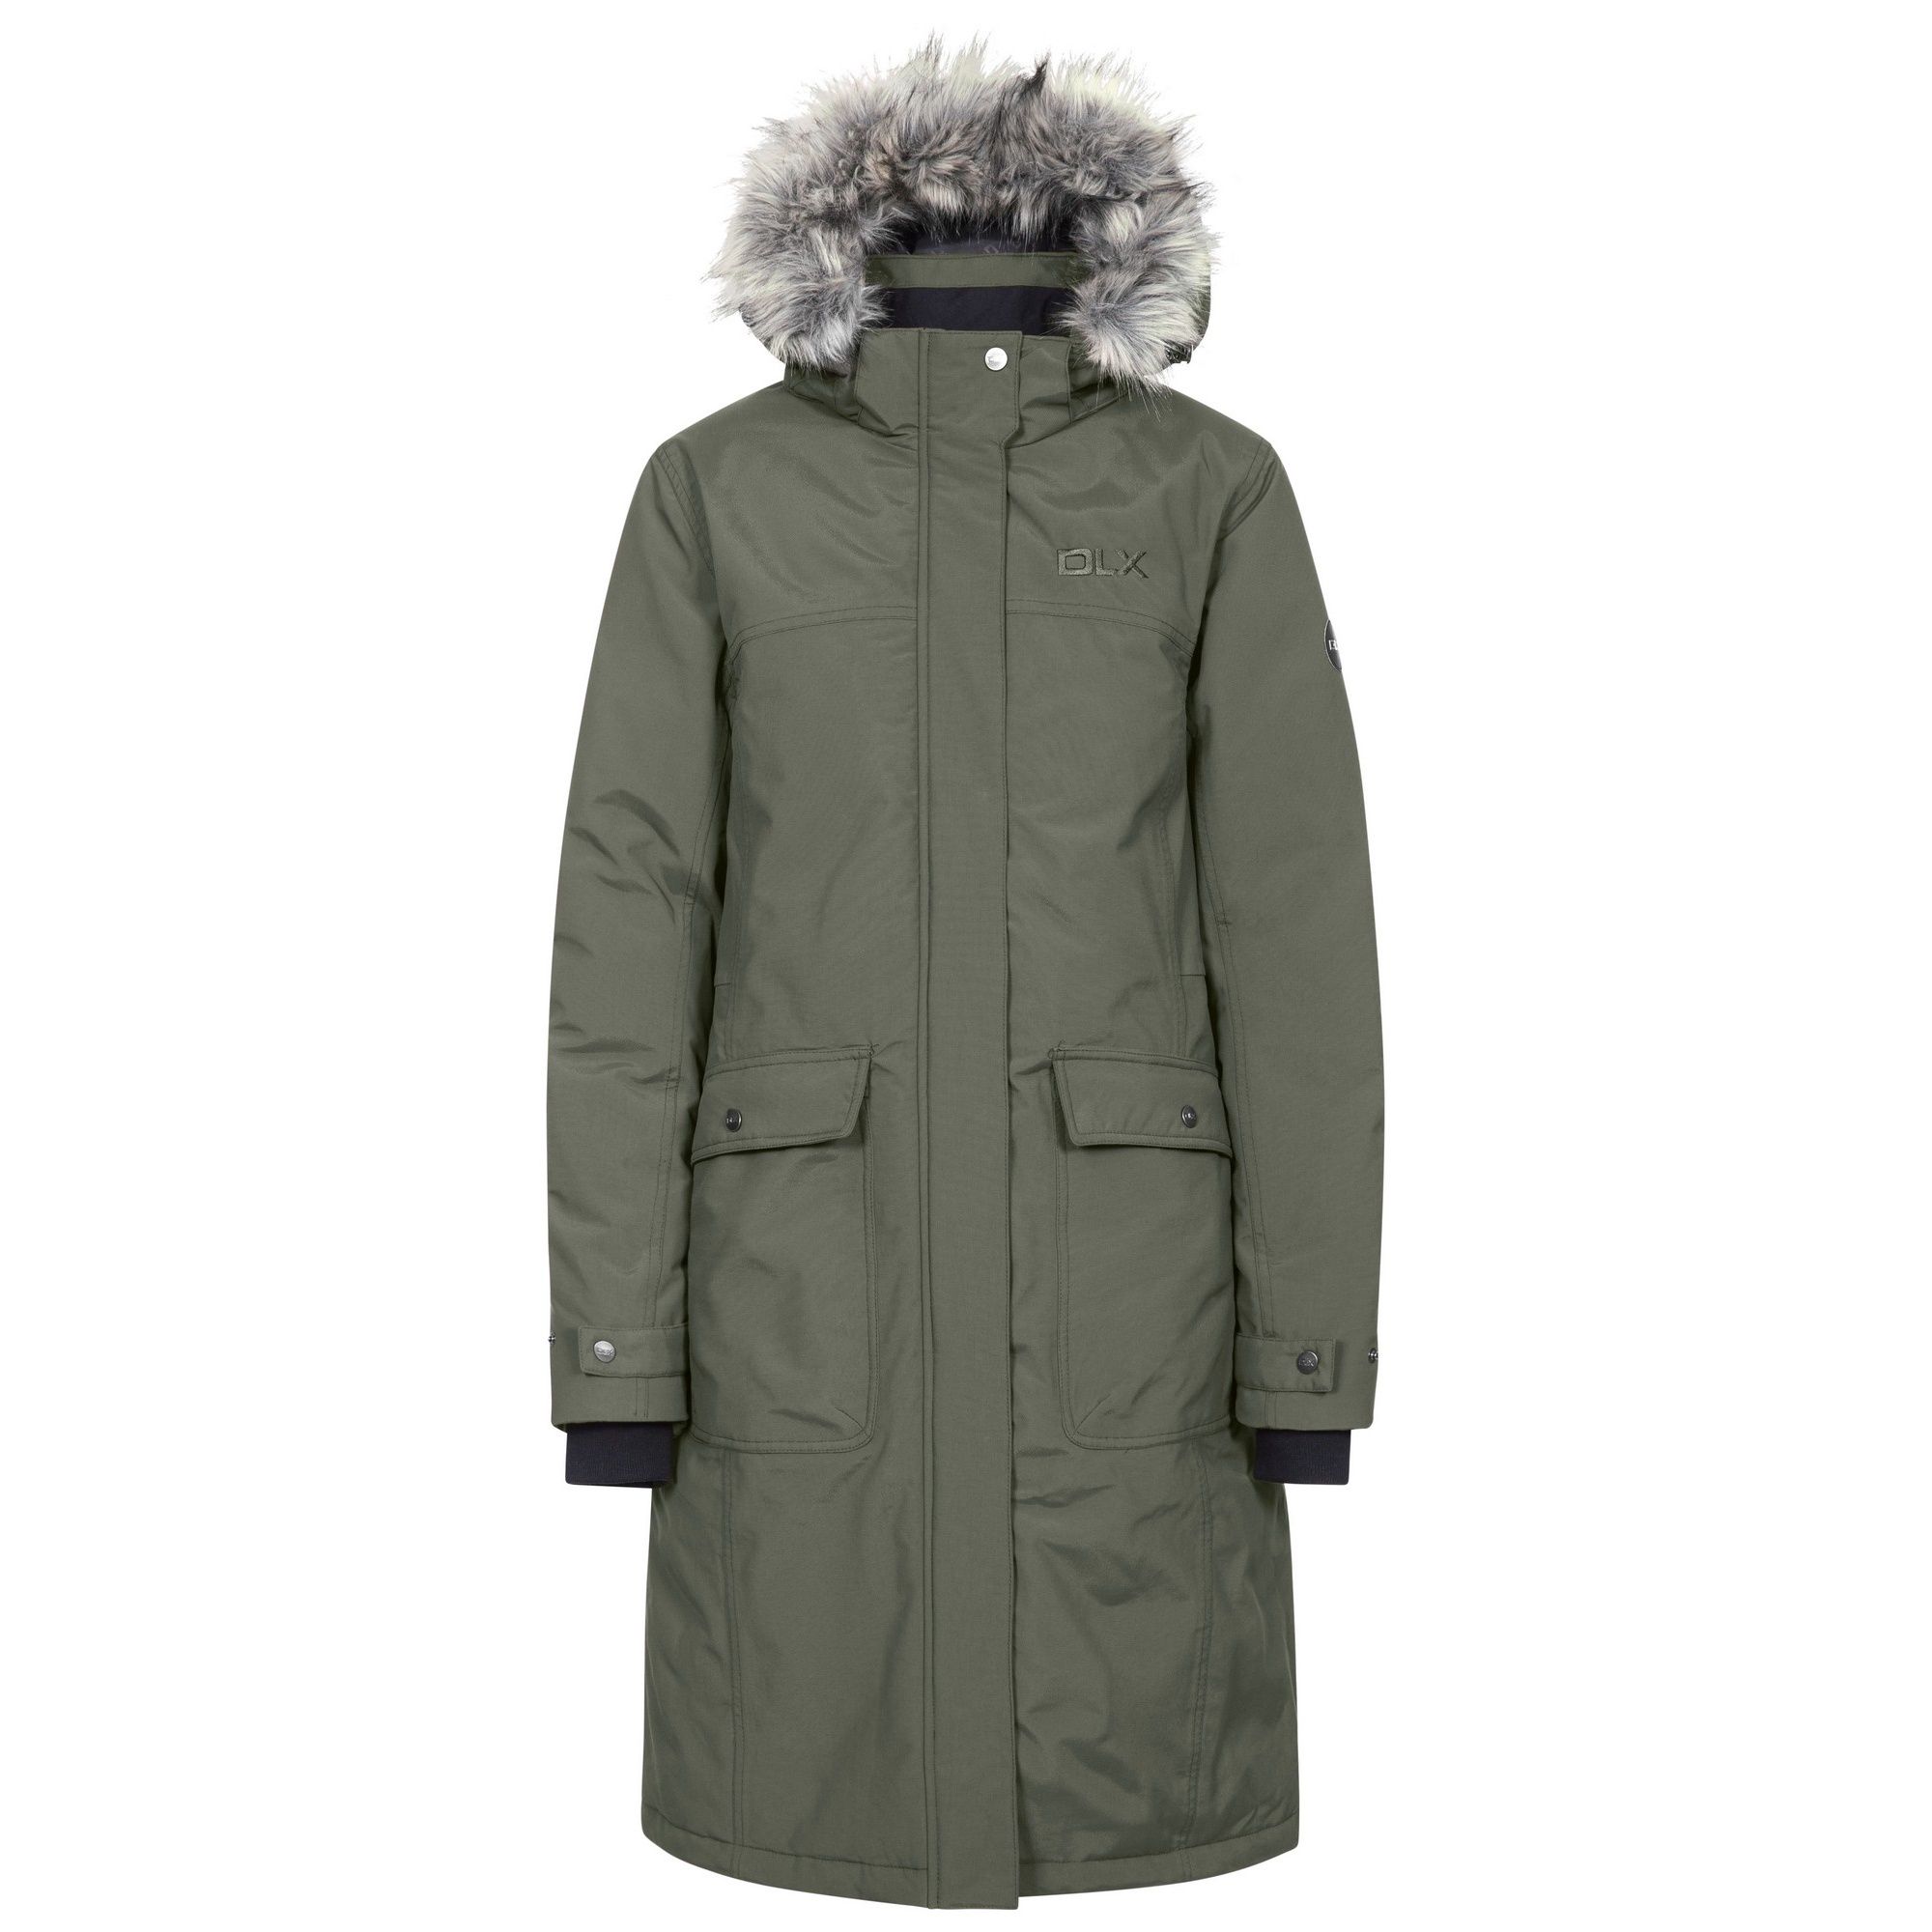 Longer length. Detachable hood with zip off faux fur trim. Double entry lower pockets. Adjustable cuffs with inner knitted cuff. Two way front zip. 2 inner pockets. Waterproof 10000mm, Breathable 5000mvp, windproof, taped seams. Shell: 100% Polyamide TPU membrane, Lining: 100% Polyester, Filling: 90% Down/10% Feather. Trespass Womens Chest Sizing (approx): XS/8 - 32in/81cm, S/10 - 34in/86cm, M/12 - 36in/91.4cm, L/14 - 38in/96.5cm, XL/16 - 40in/101.5cm, XXL/18 - 42in/106.5cm.